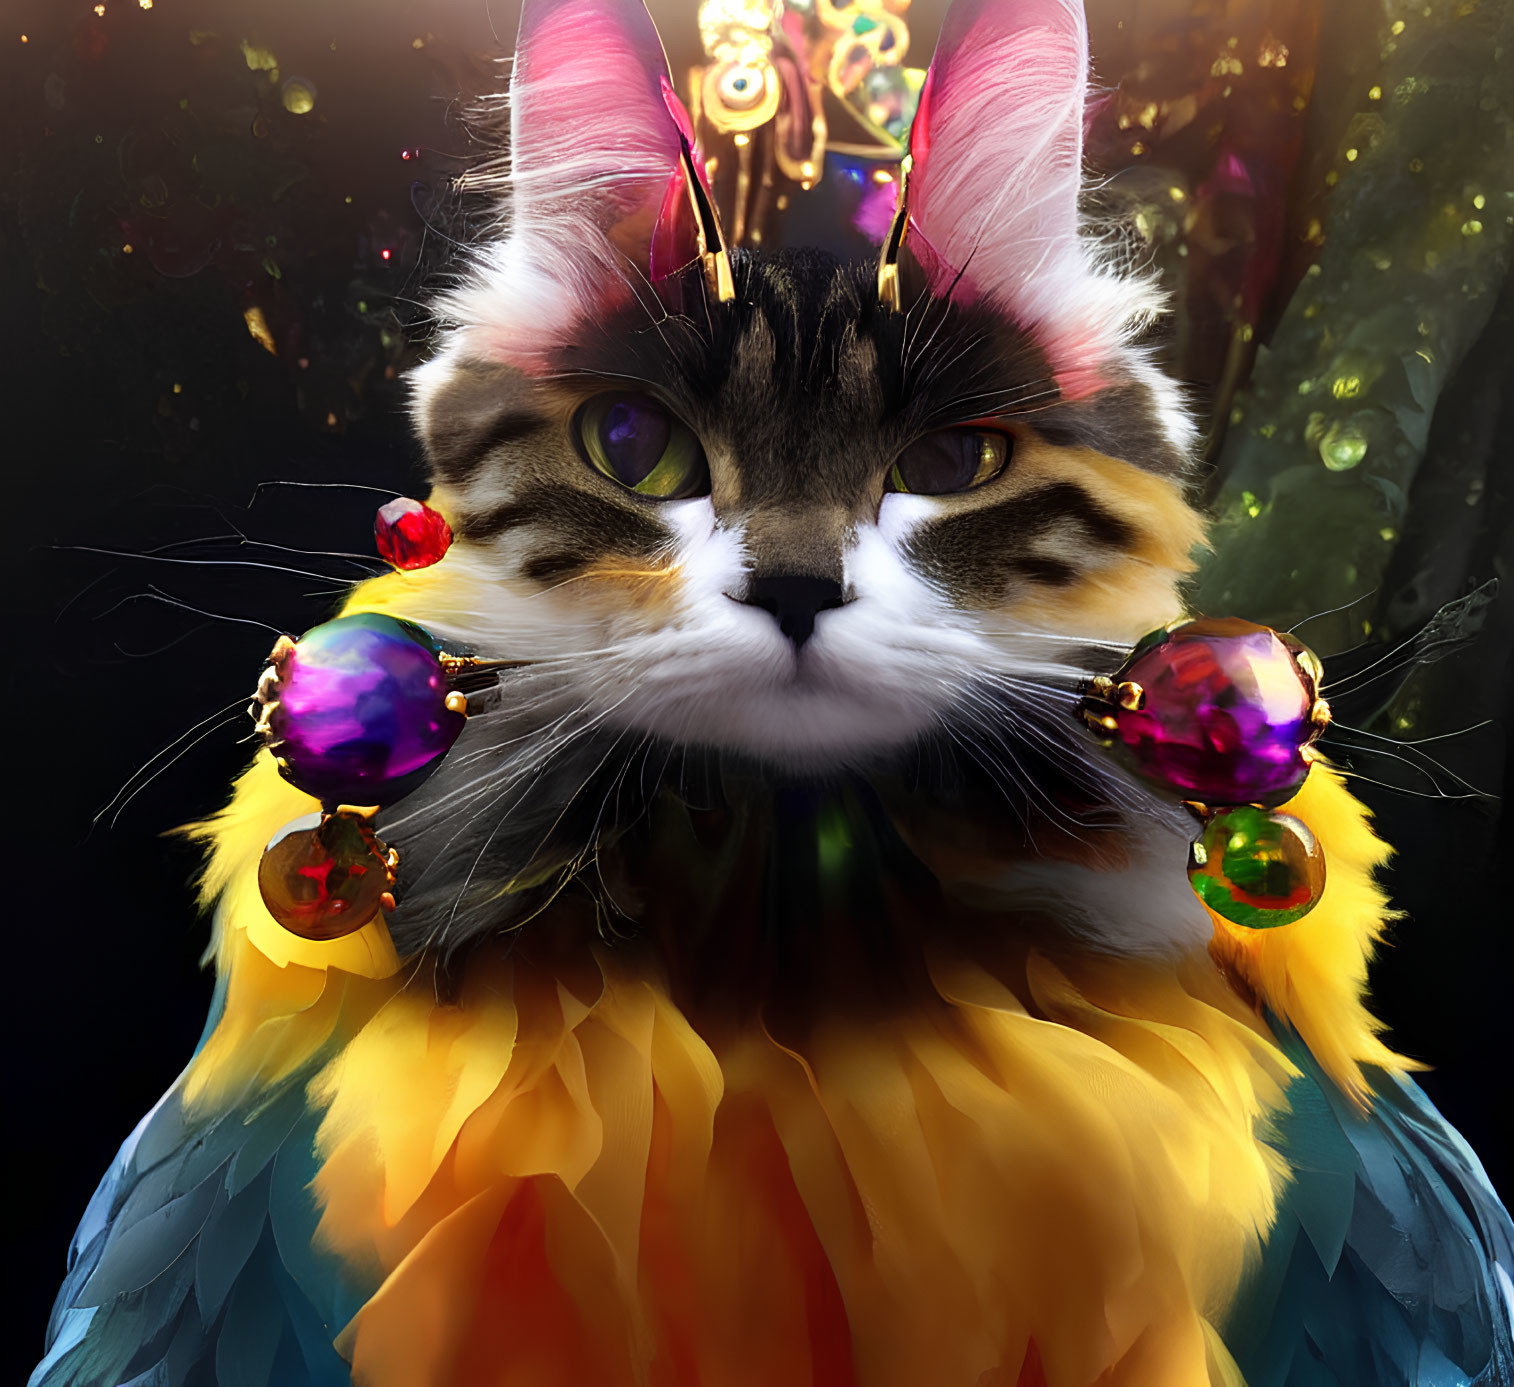 Green-eyed cat adorned with colorful feathers and jewels on dark mystical background